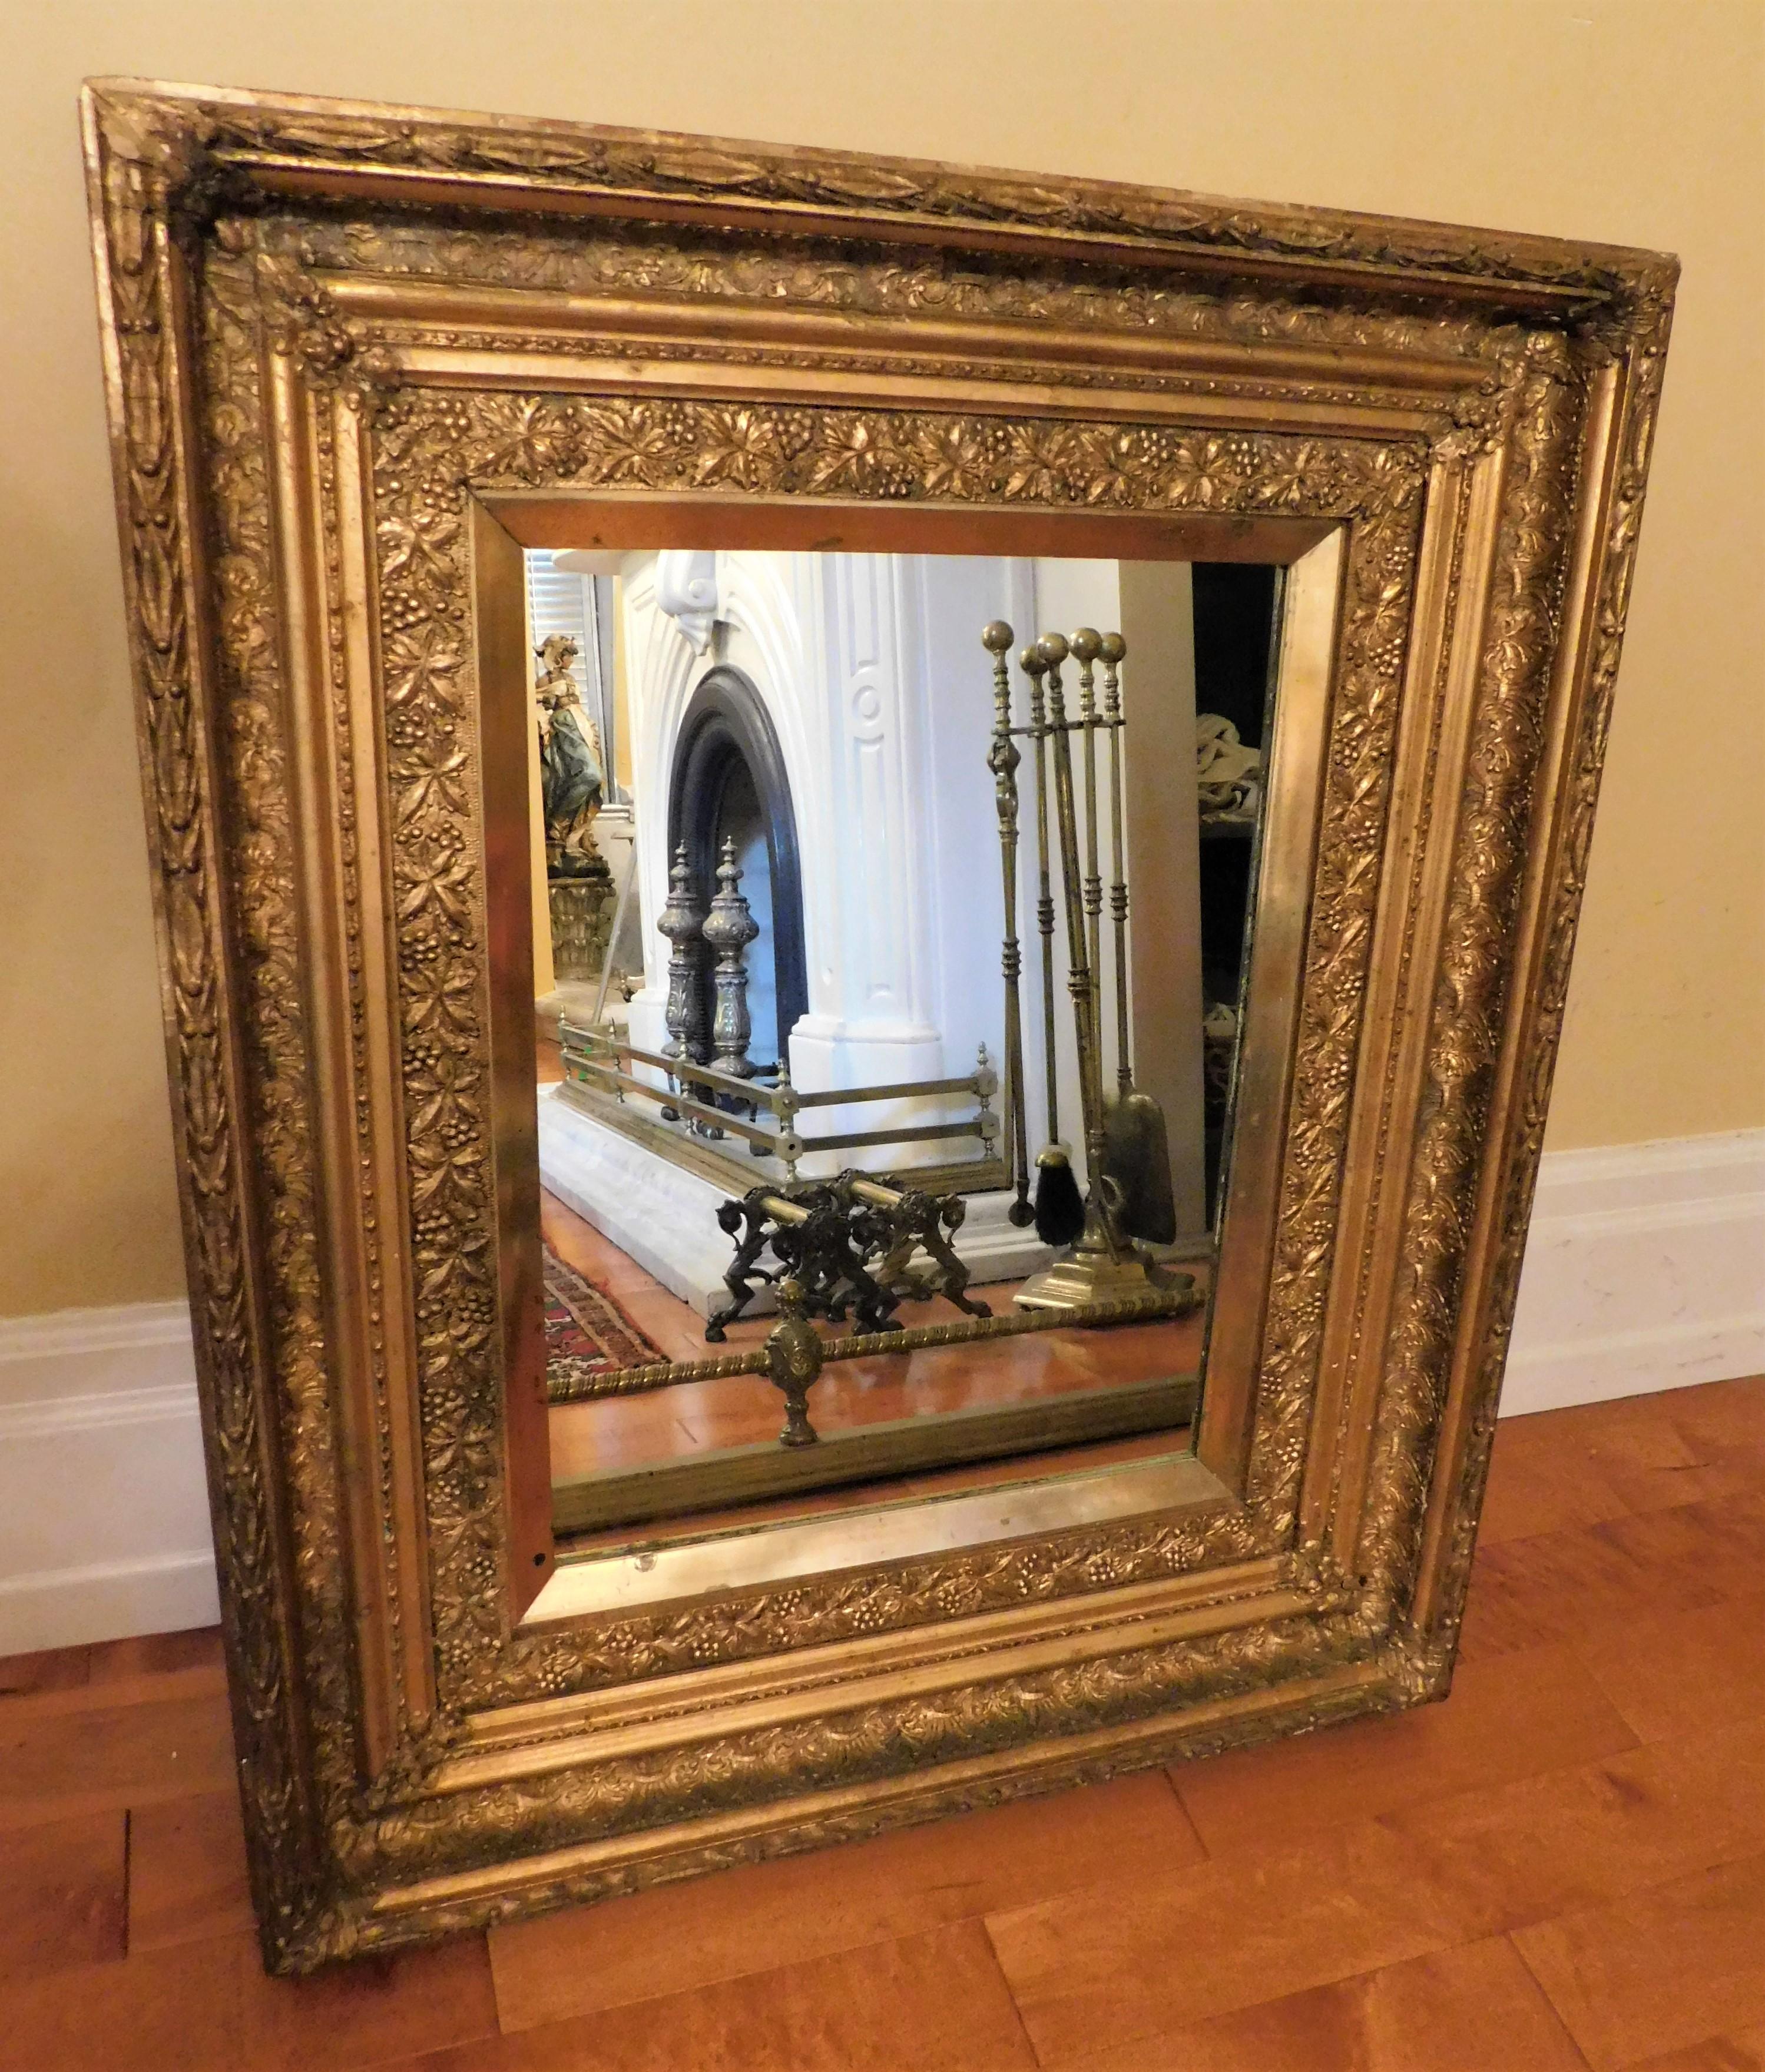 Belgium in a French style gold framed mirror, circa 1910. Beautiful mirror that can be used on a wall or over a fireplace, on a mantel... Or the frame could be used for a painting or a piece of art. Mirror size 17 X 22 X 1 inches, frame size 26.75 X